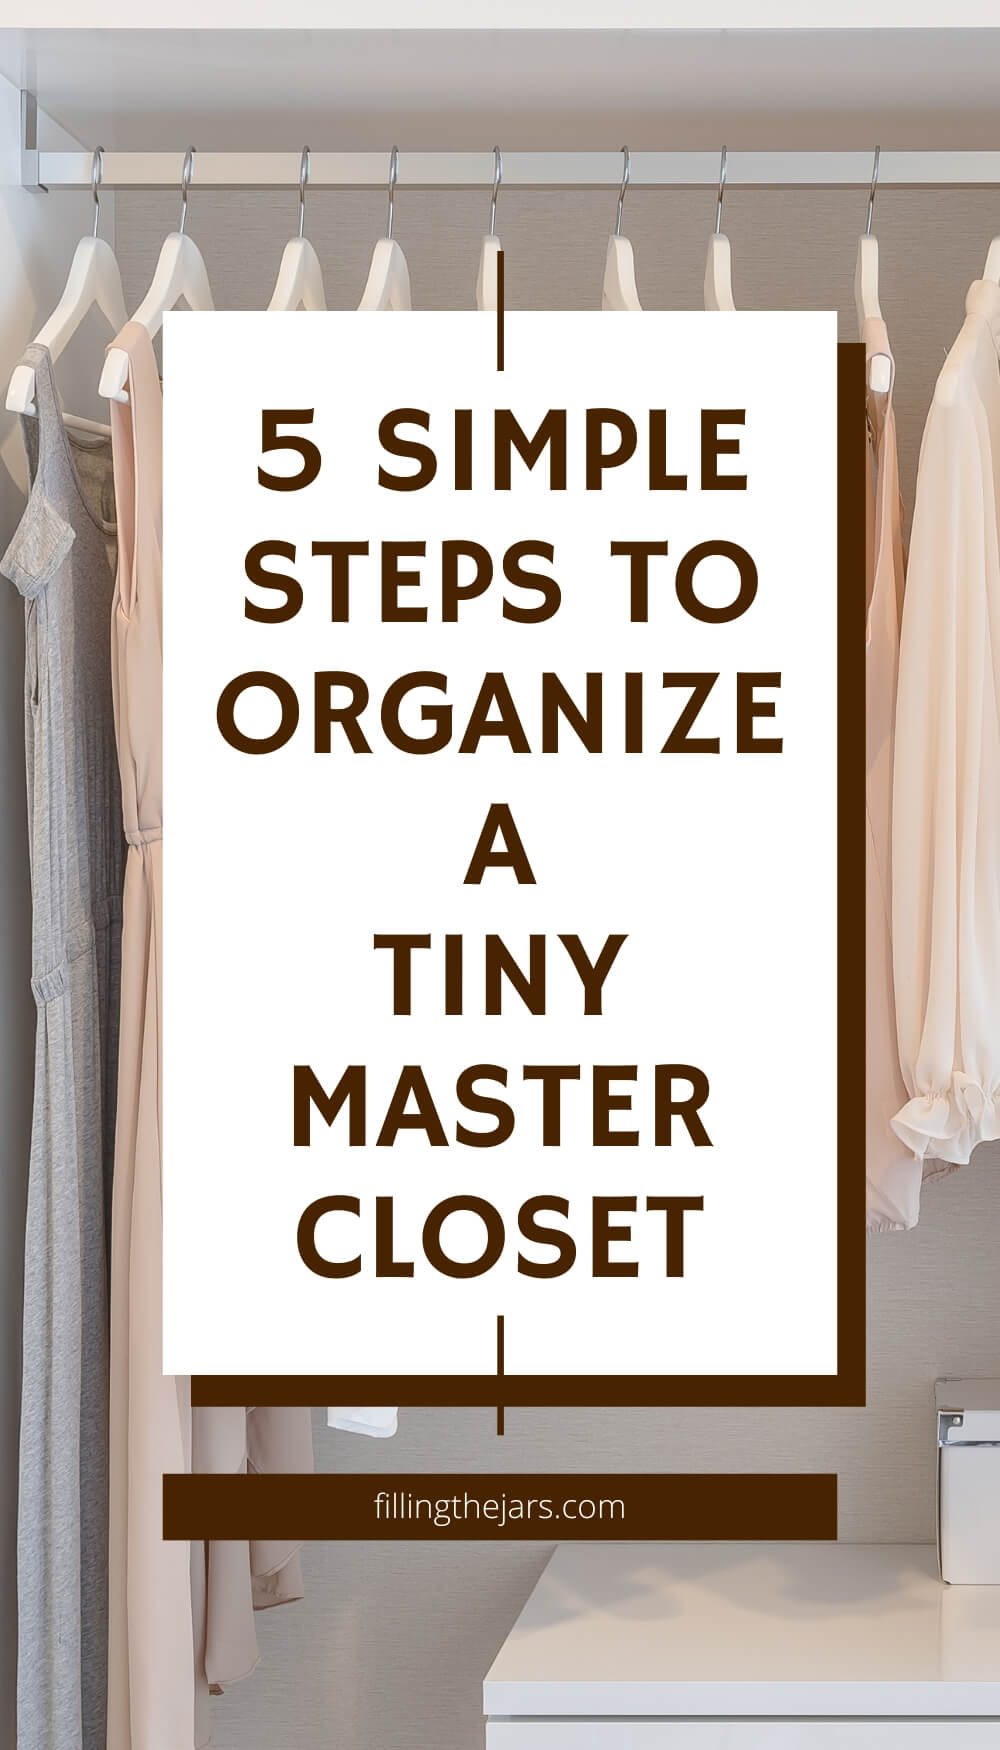 Text 5 simple steps to organize a tiny master closet on white square over background of organized closet space.